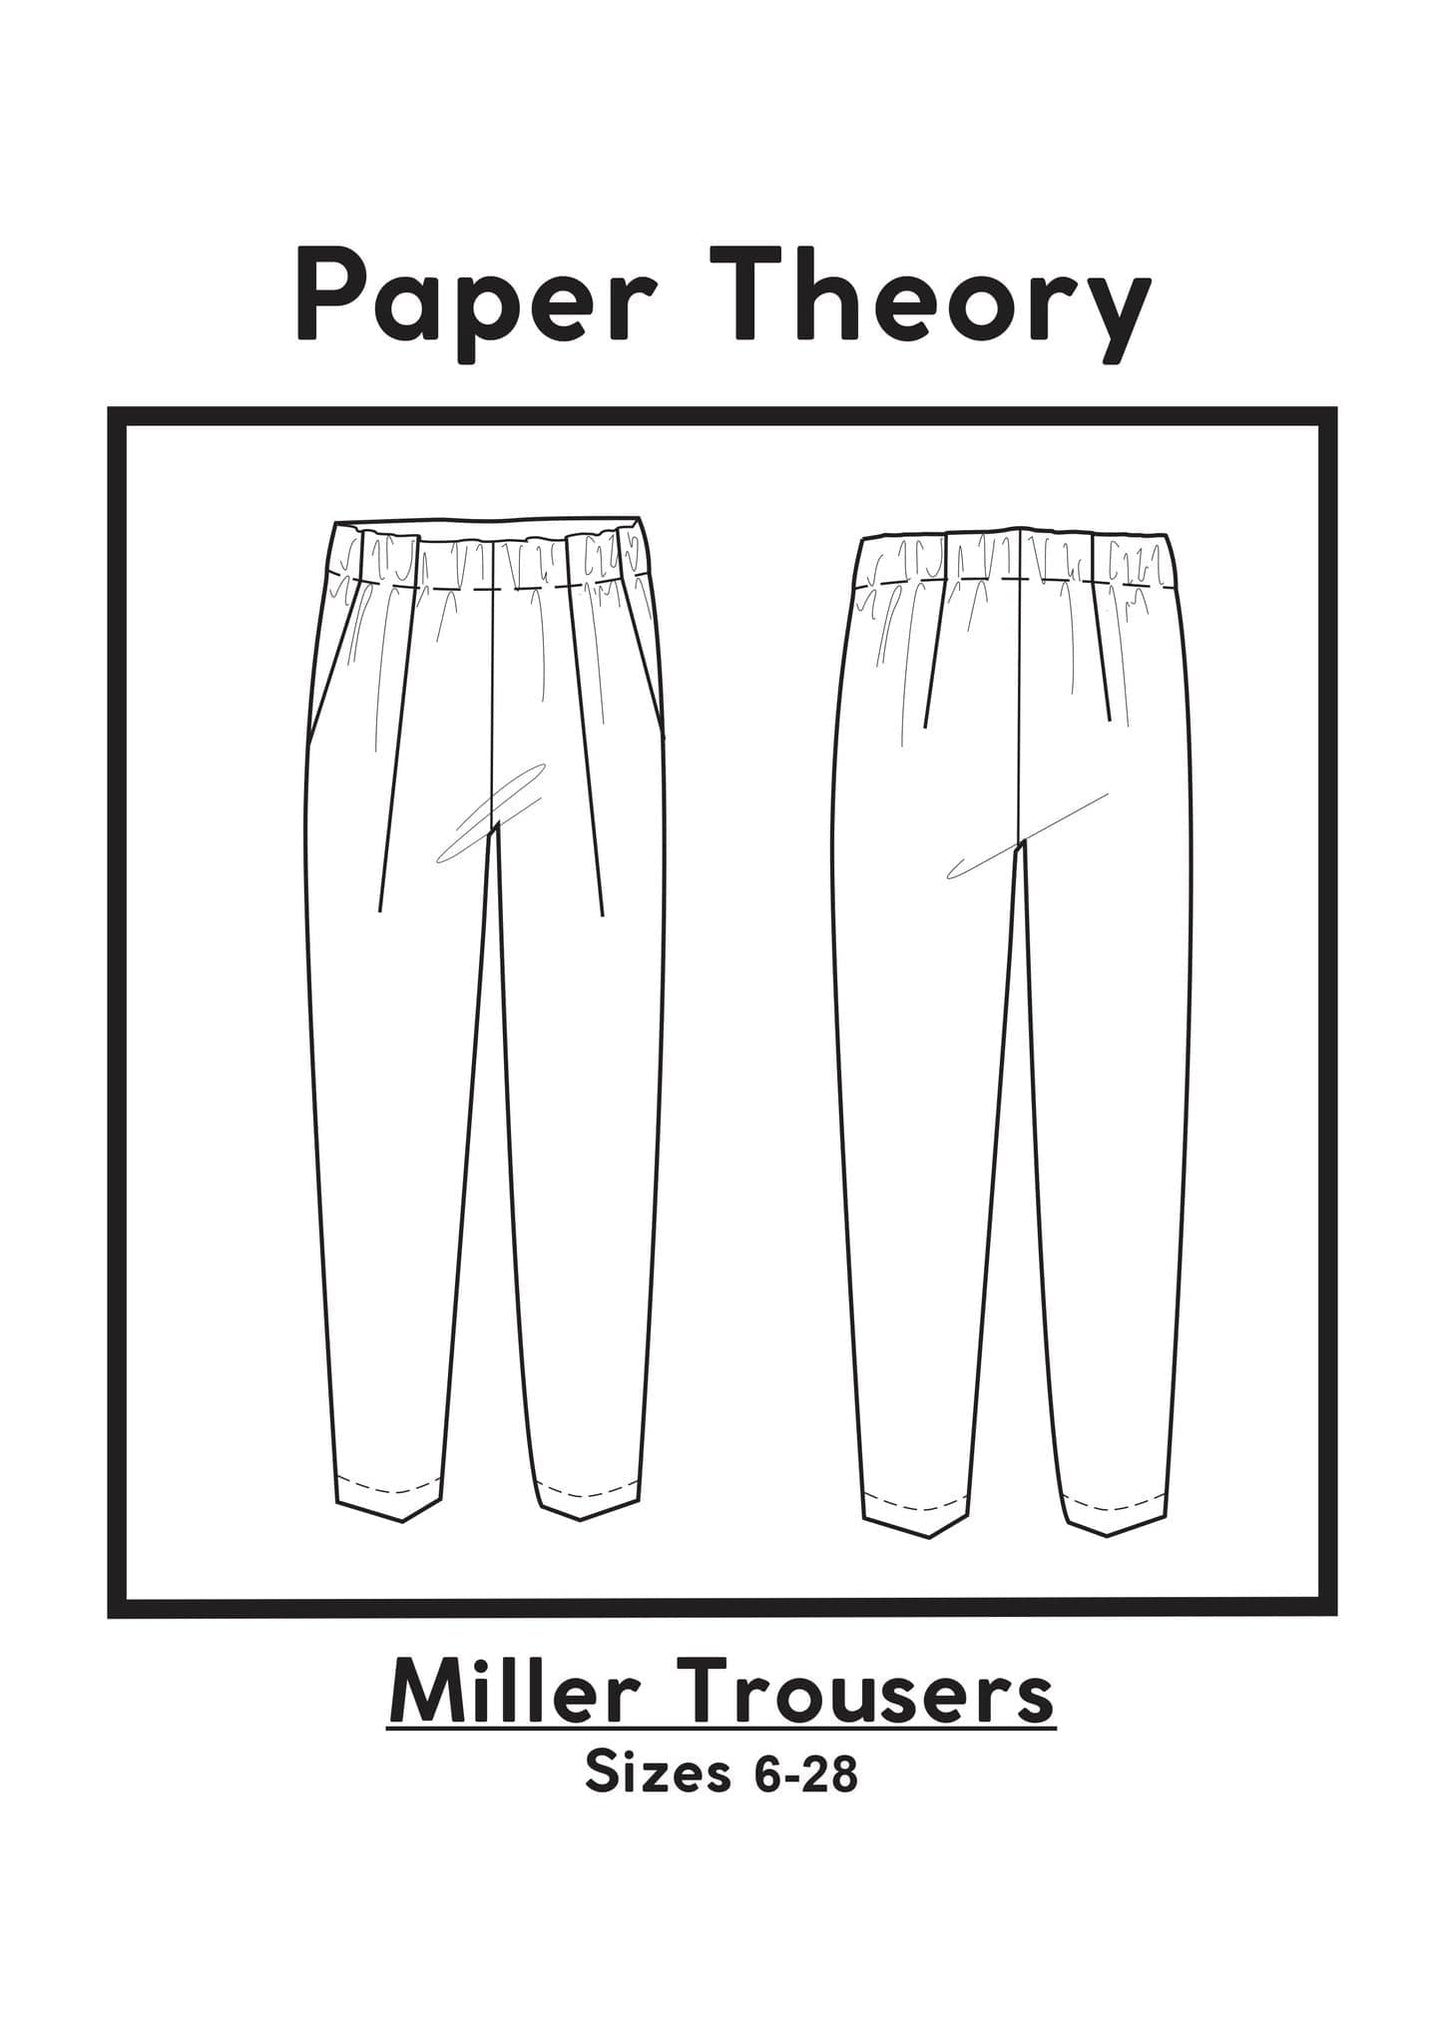 Paper Theory: Miller Trouser